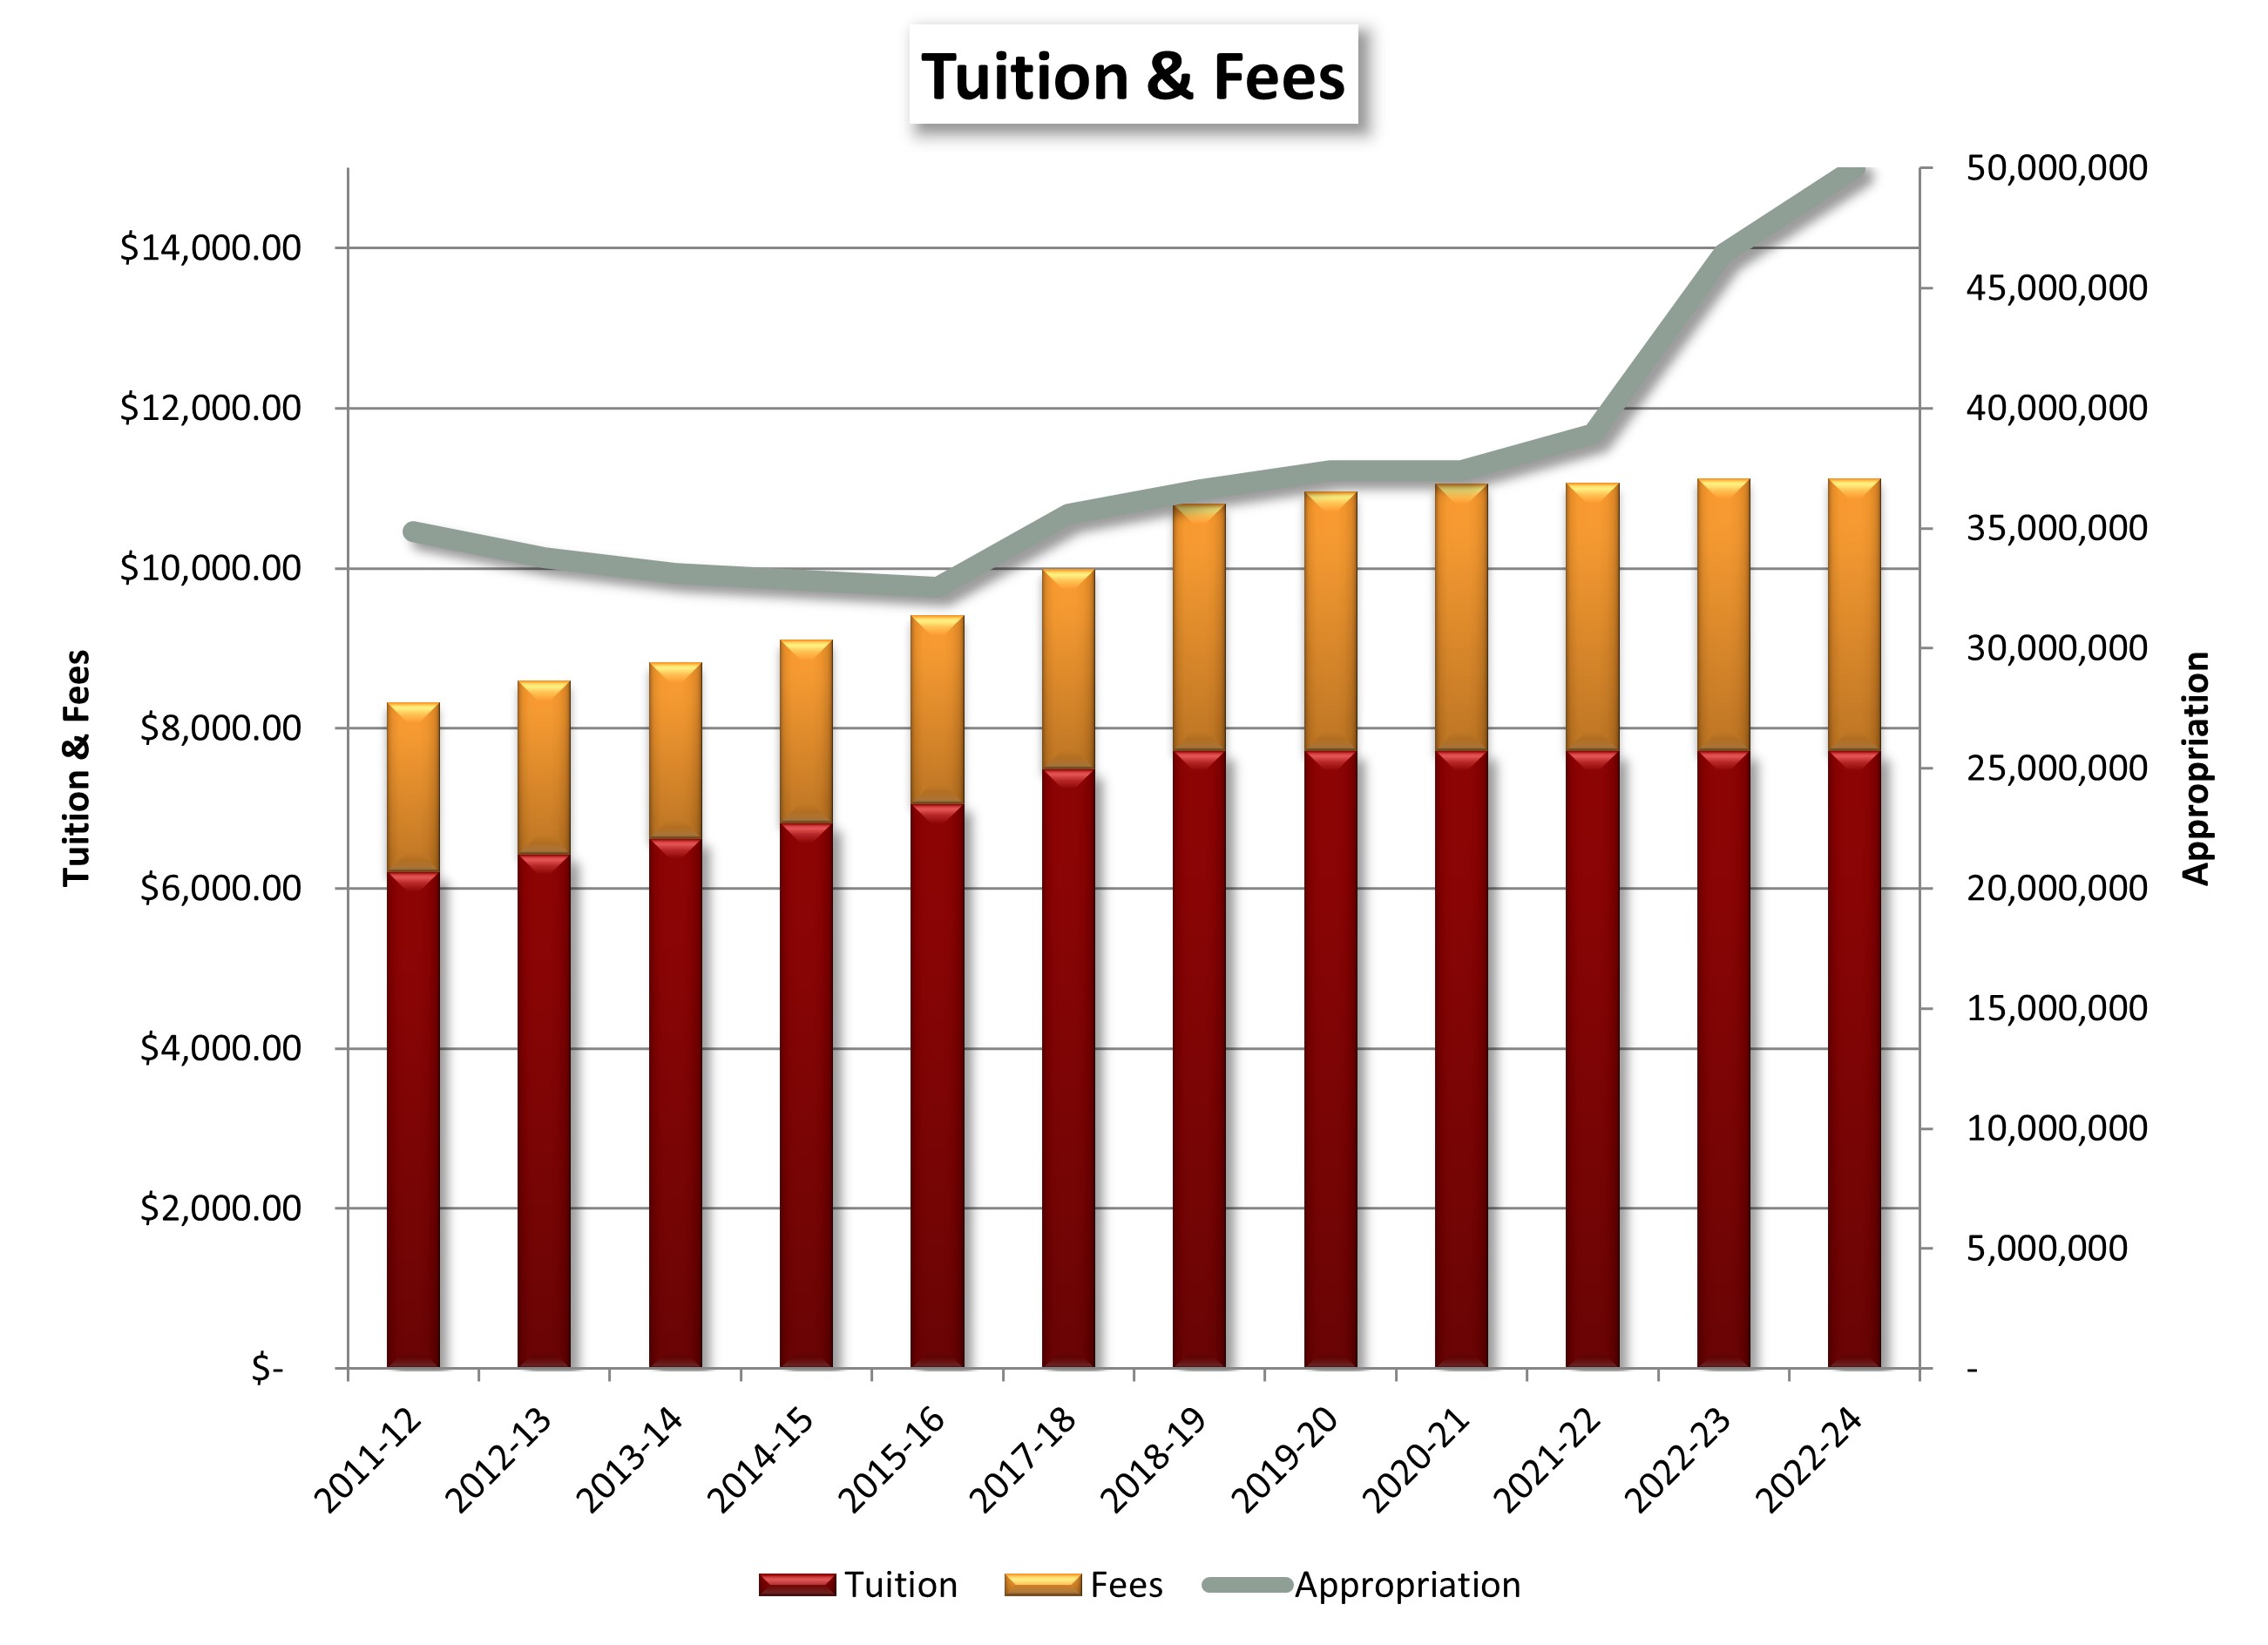 Tuition & Fees chart